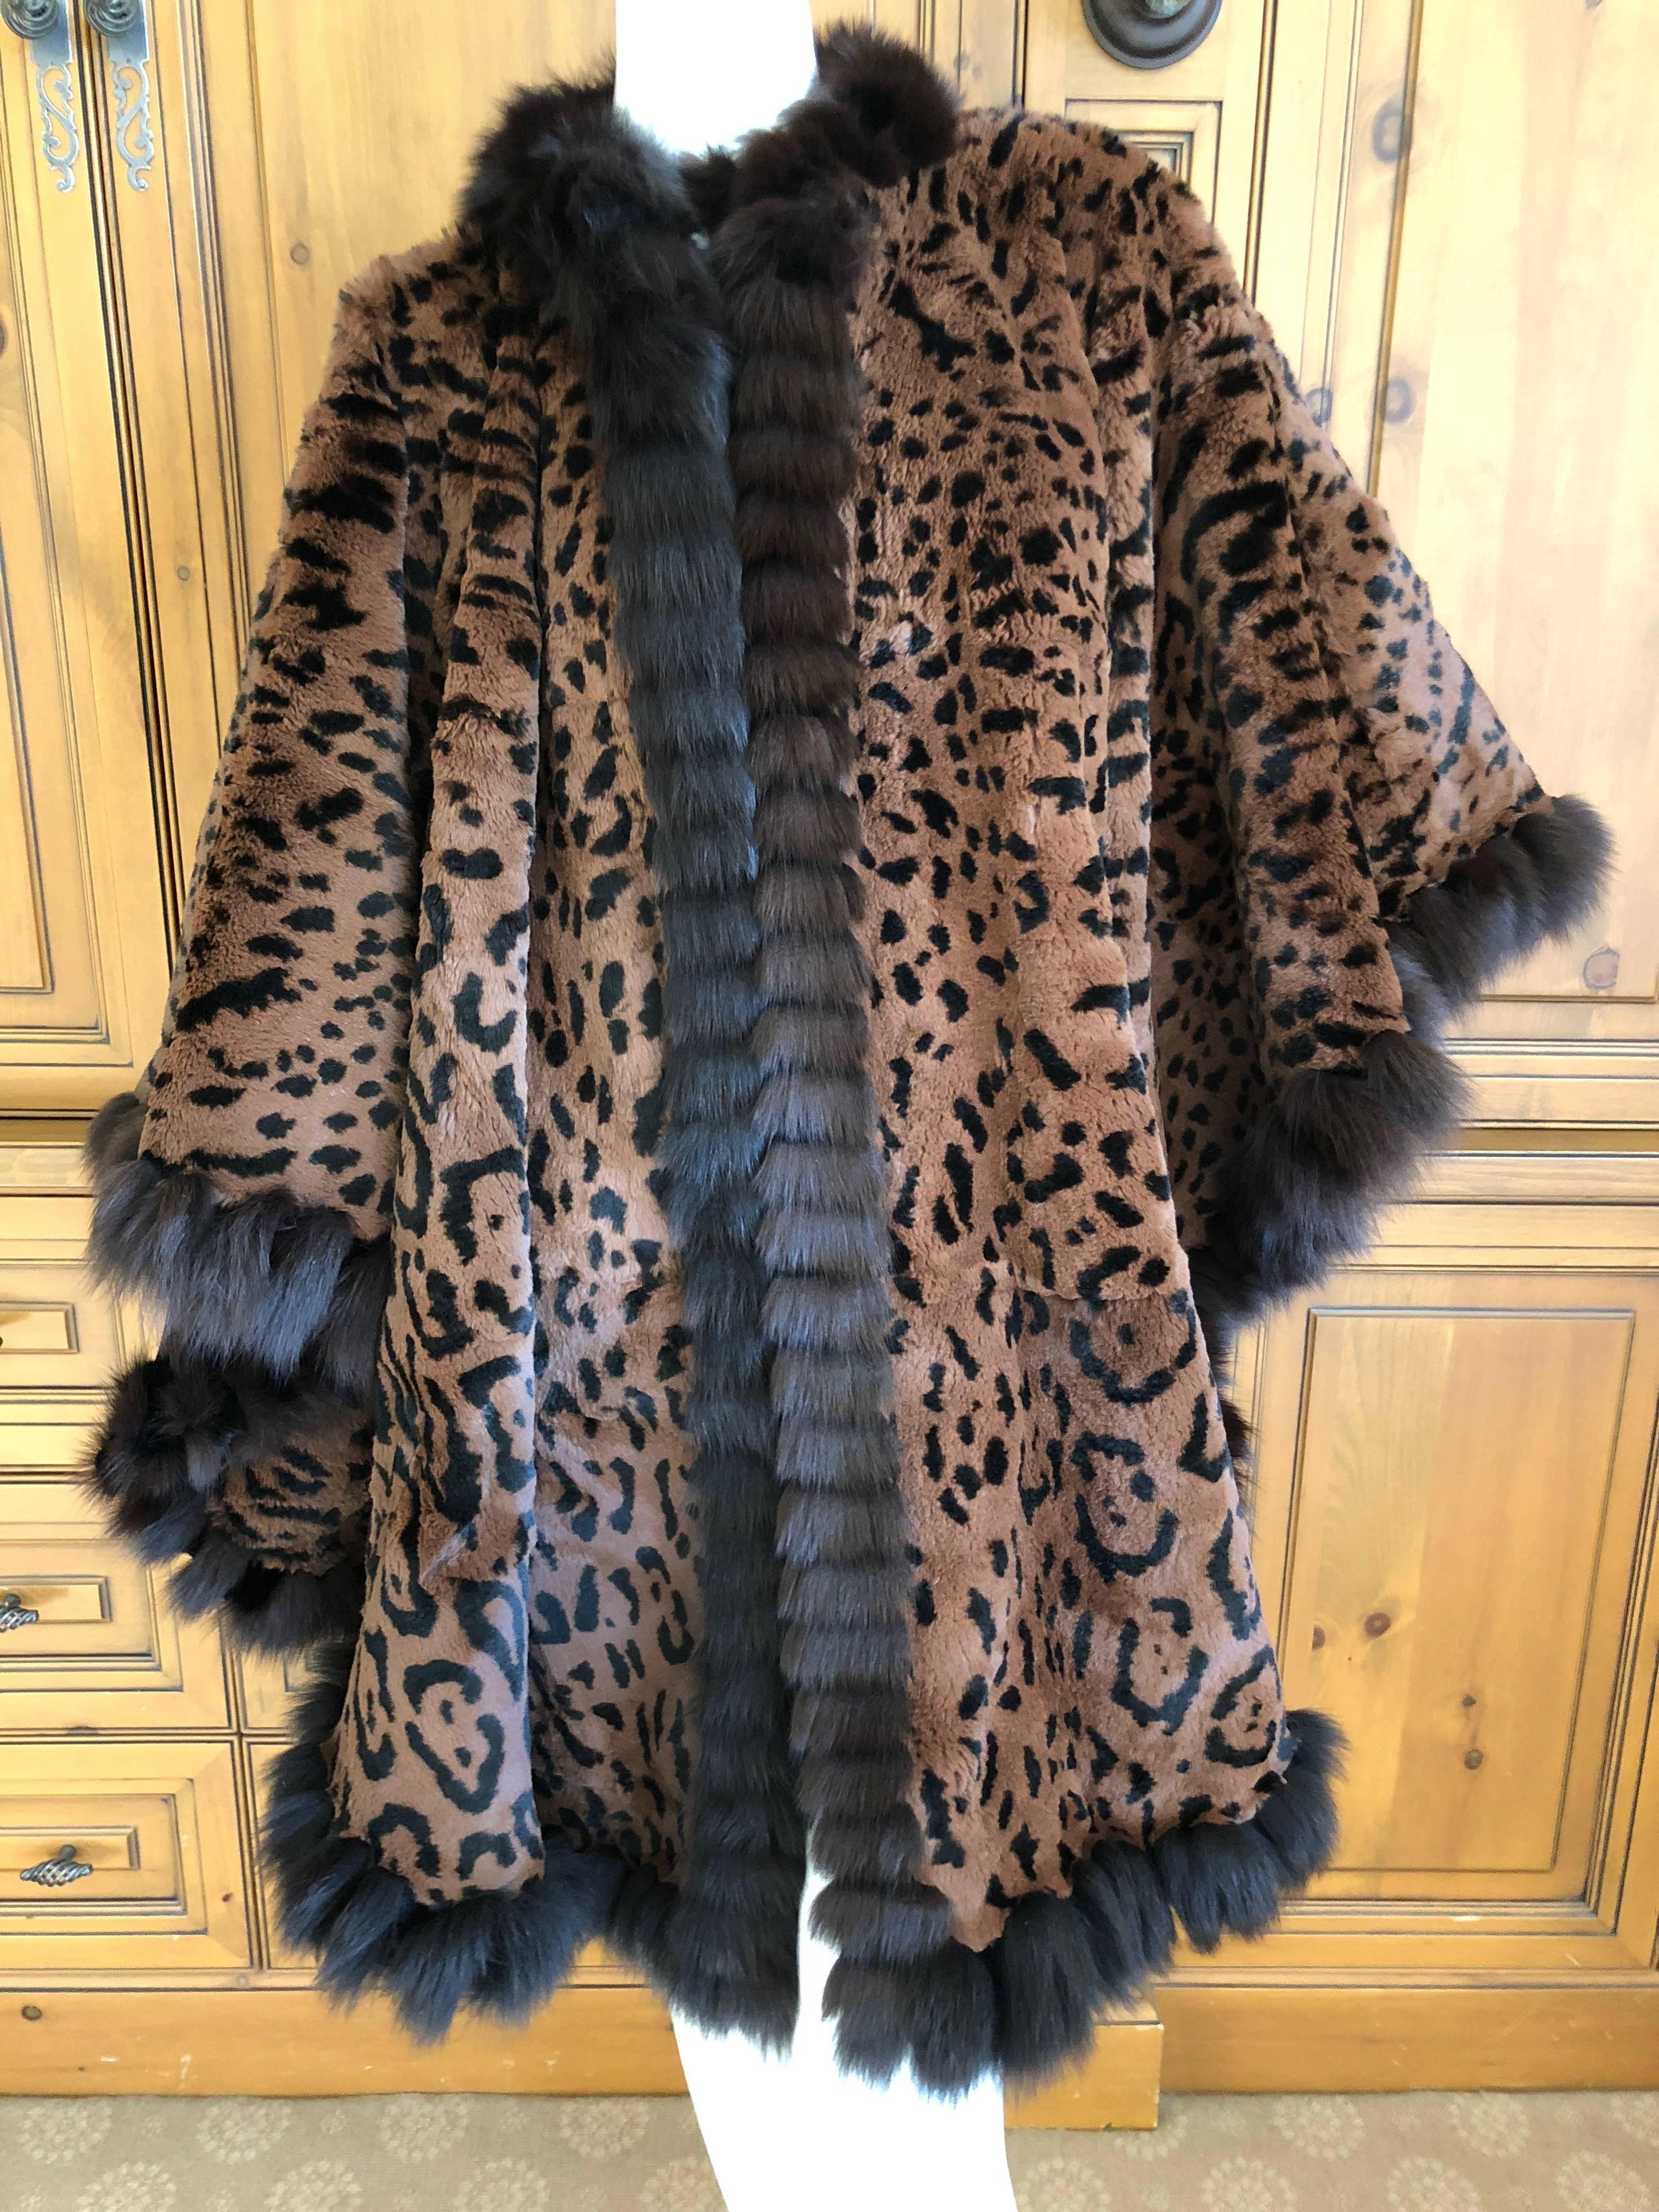 Yves Saint Laurent Fourrures Reversible Huge Swing Cape Sheared Leopard Pattern Fur with Sable Trim.
The sheared fur has a printed leopard pattern and I believe it is sheared Nutria, it was a popular fur for YSL in the eighties.
This is amazing, and